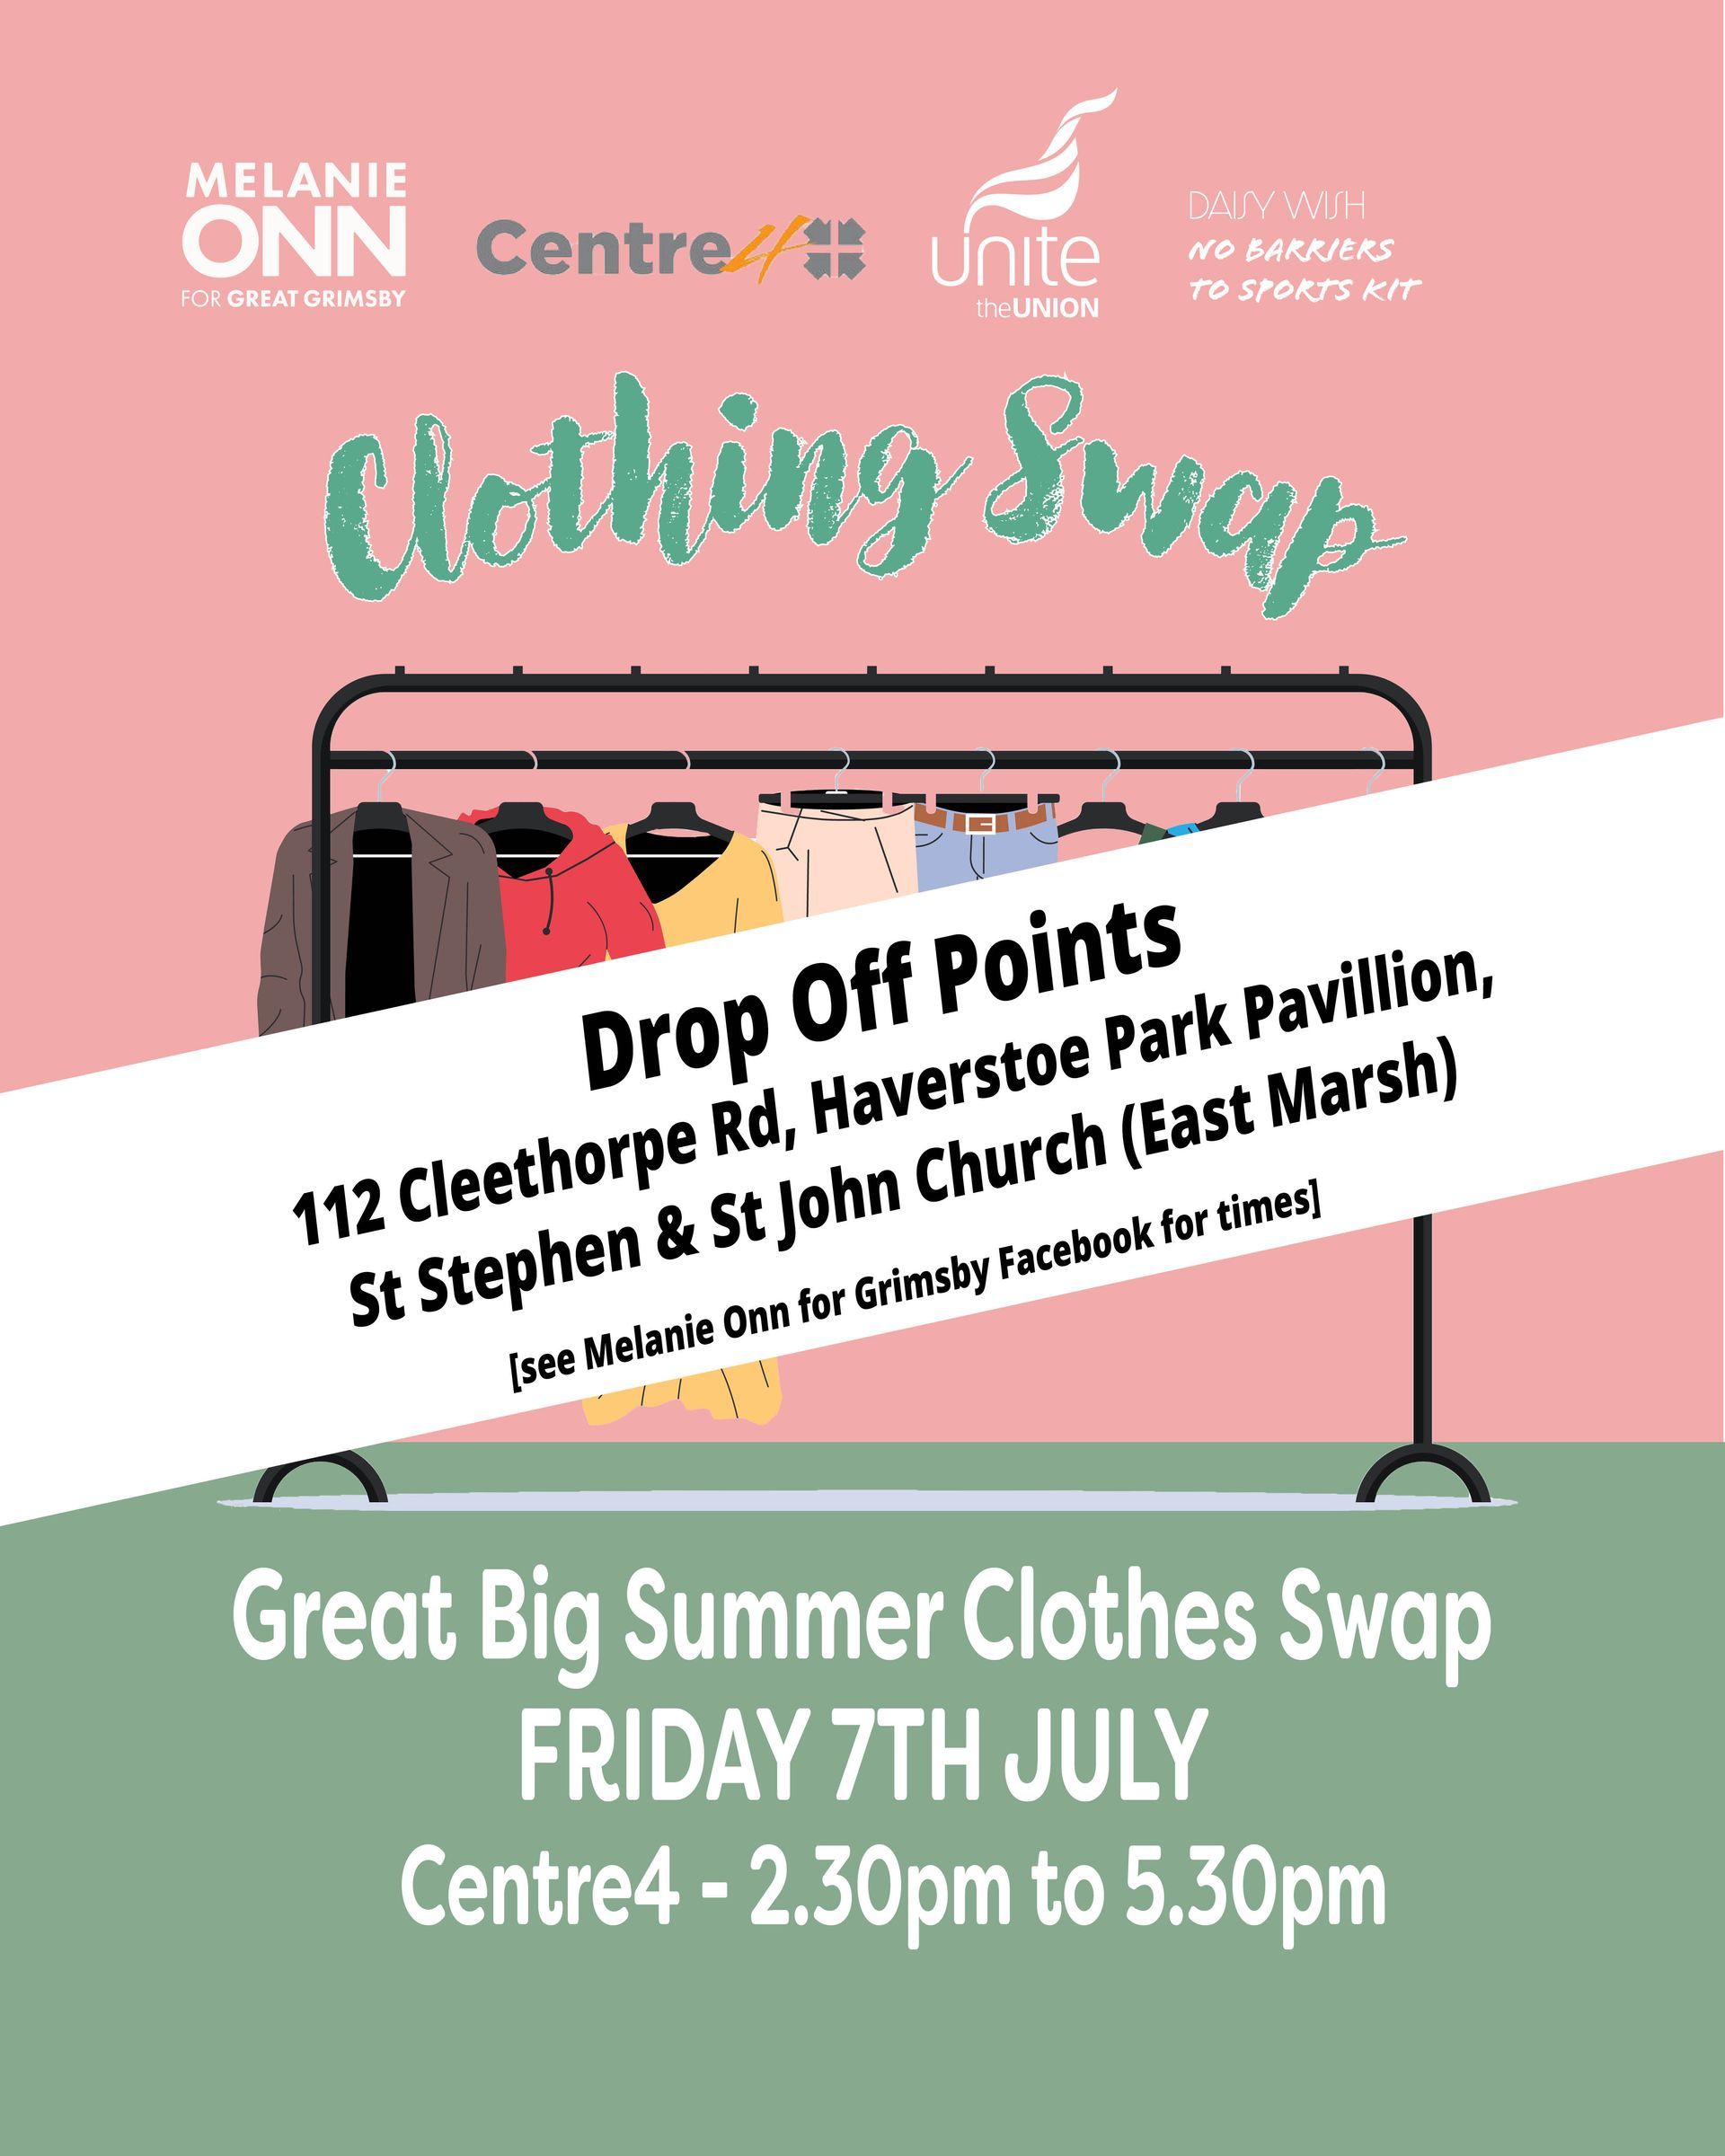 The Great Big Summer Clothes Swap